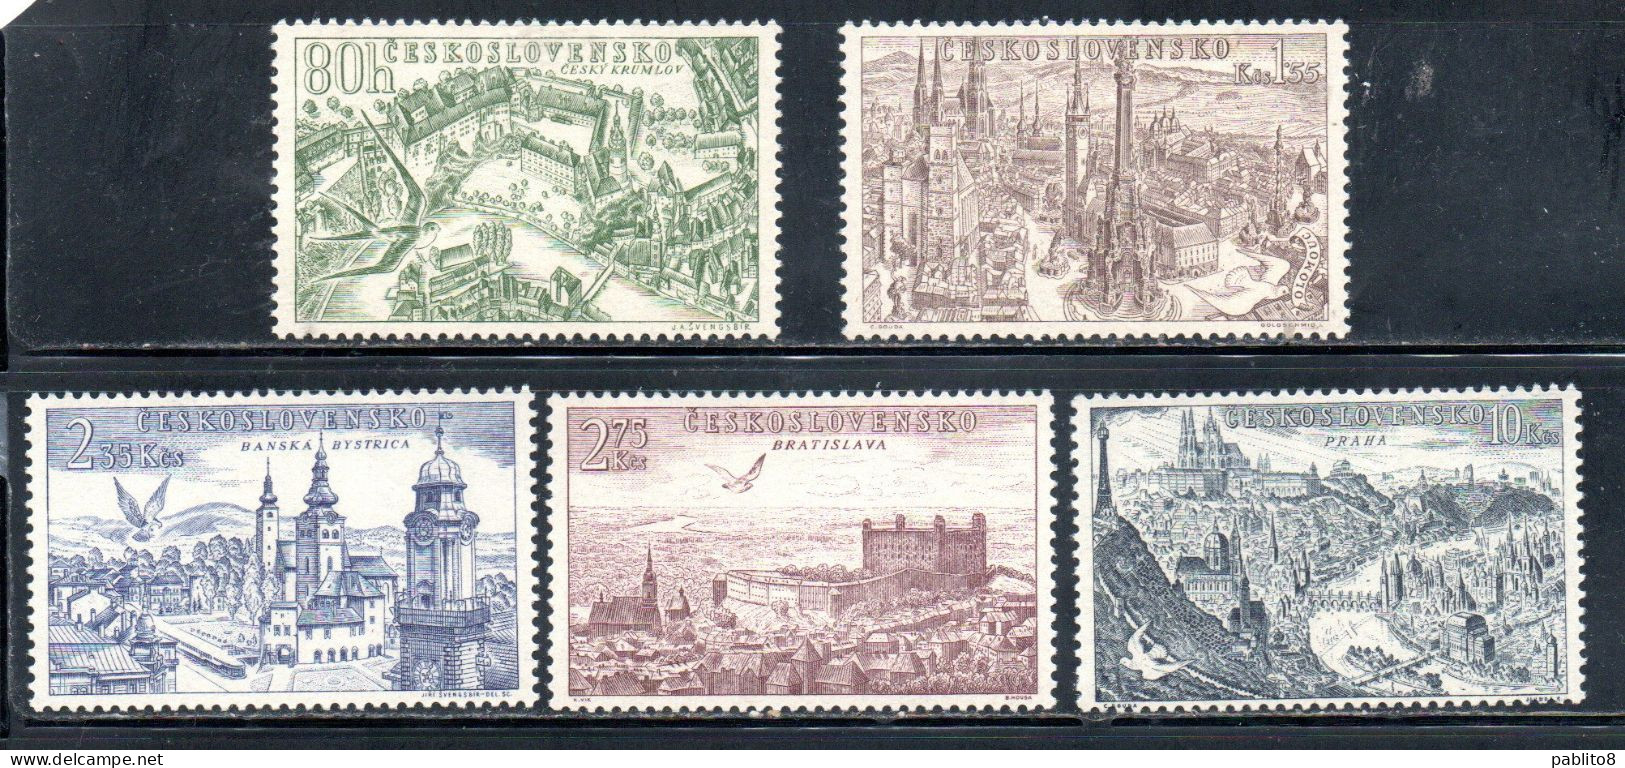 CZECHOSLOVAKIA CECOSLOVACCHIA 1955 AIR POST MAIL AIRMAIL VIEWS COMPLETE SET SERIE COMPLETA MNH - Luftpost